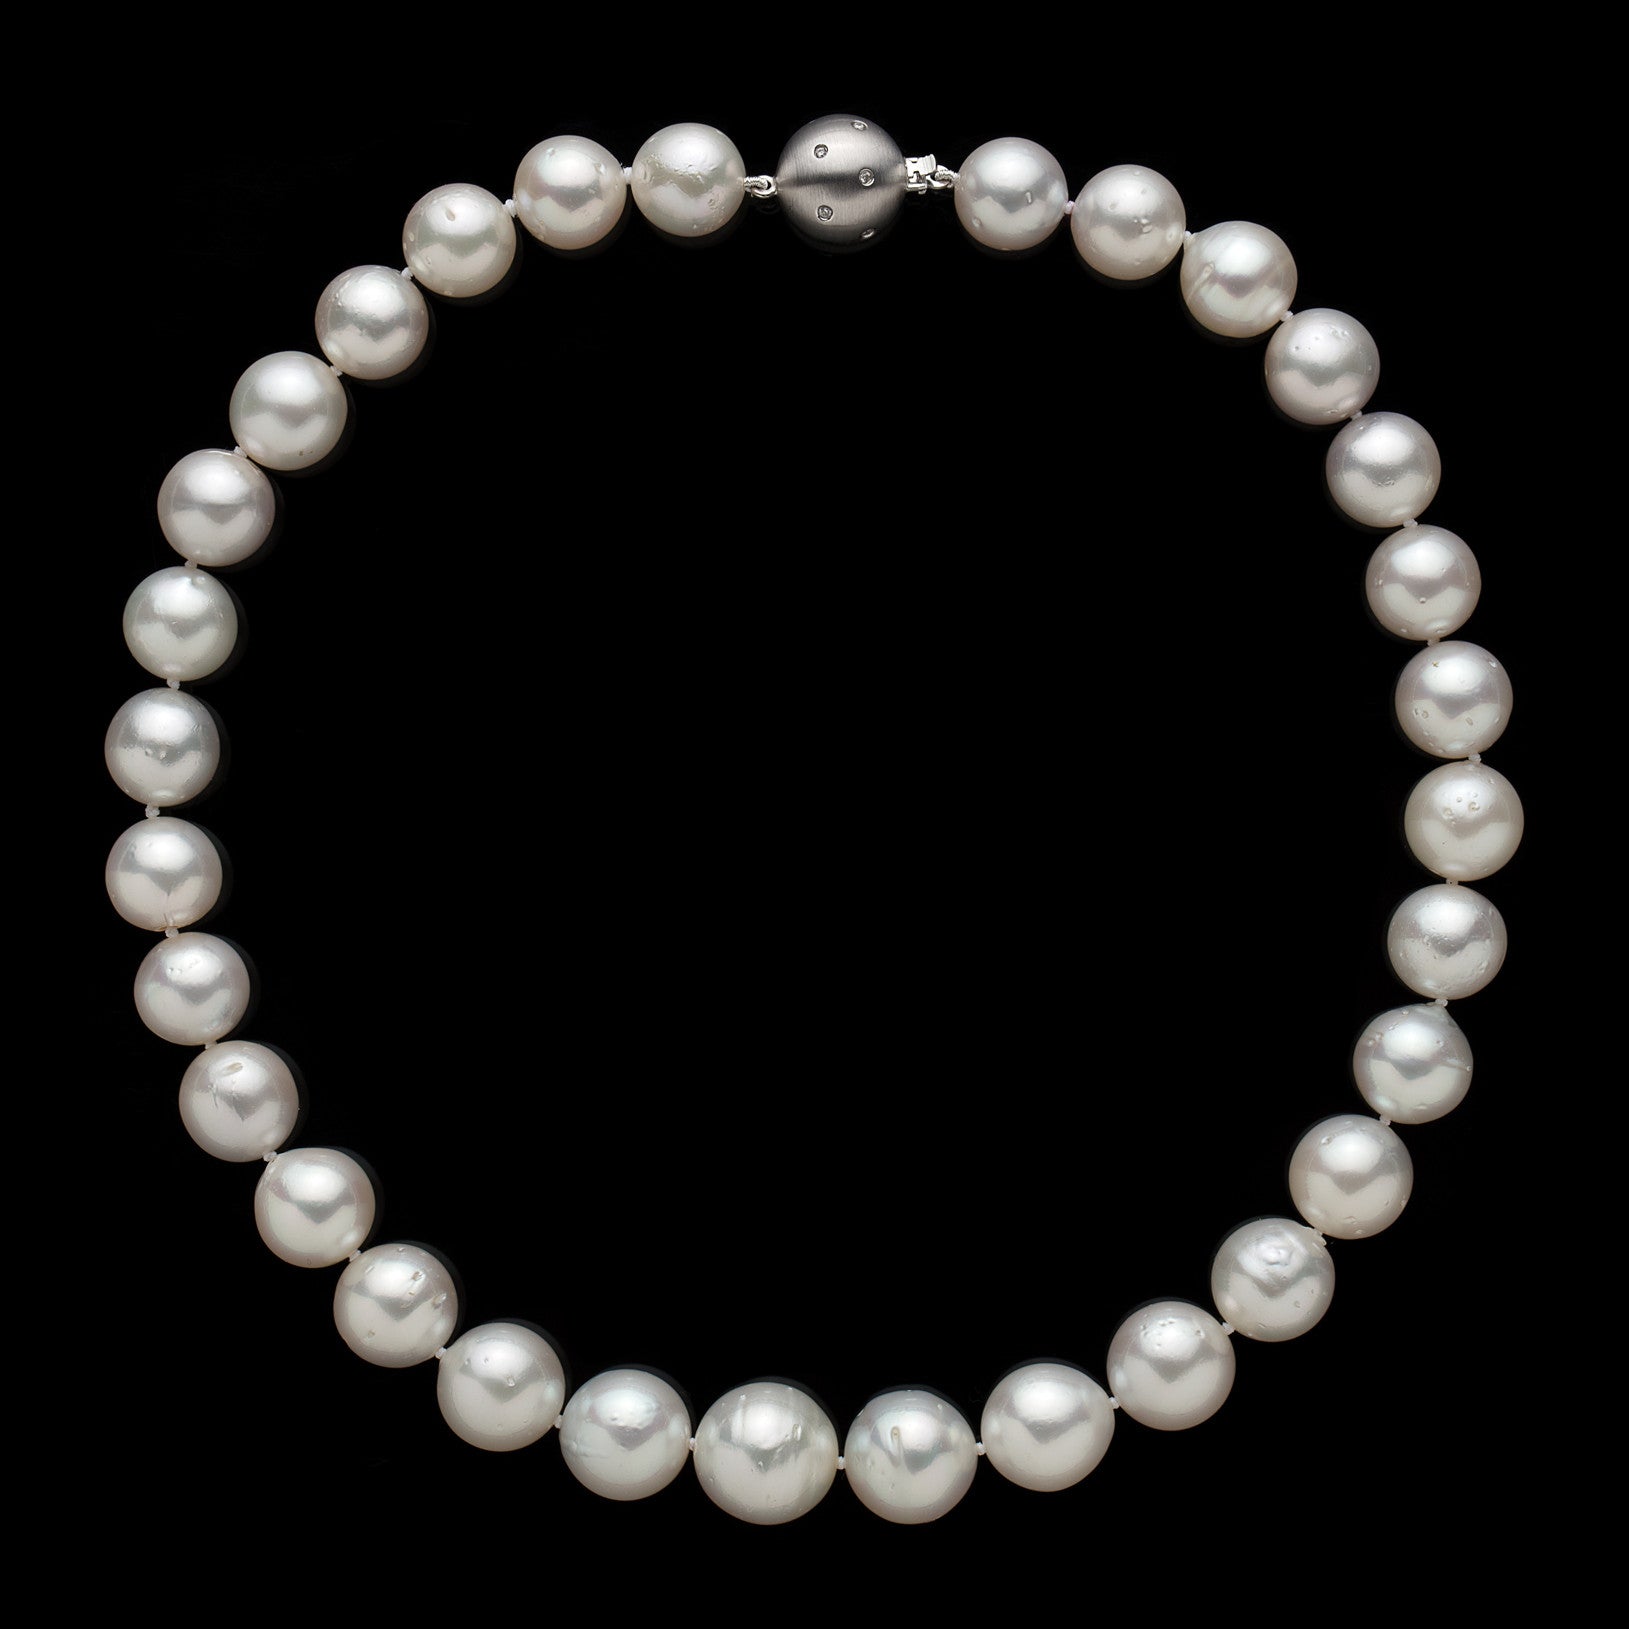 14K White Gold Clasp 1930s Graduated Cultured Pearl Necklace 20” Length |  eBay